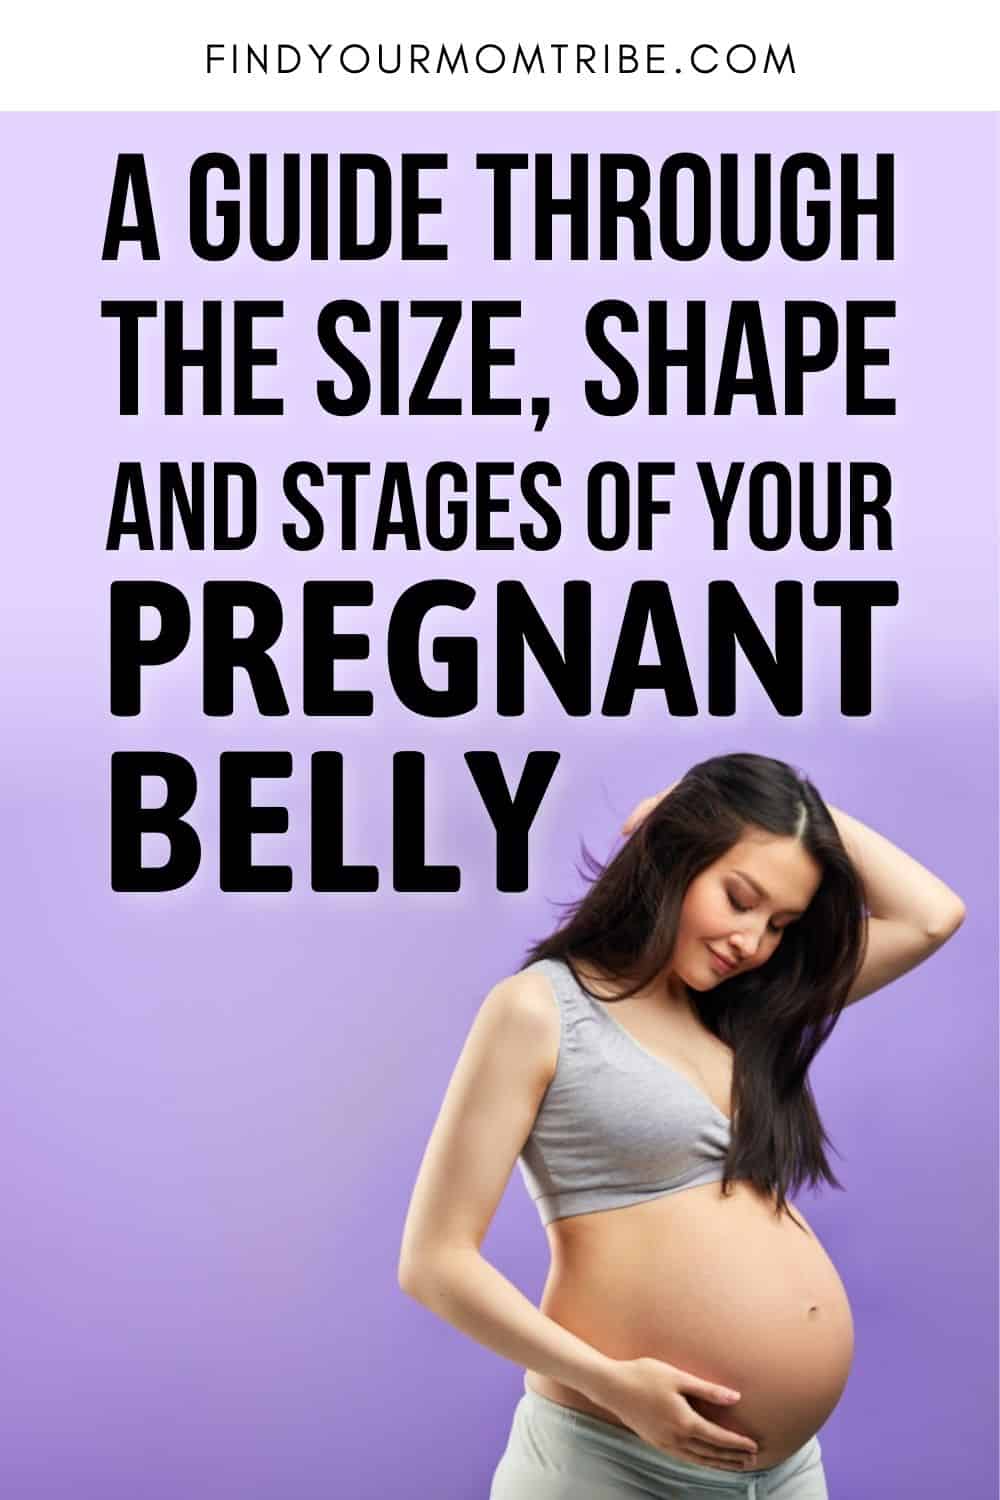 A Guide Through The Size, Shape And Stages Of Your Pregnant Belly Pinterest